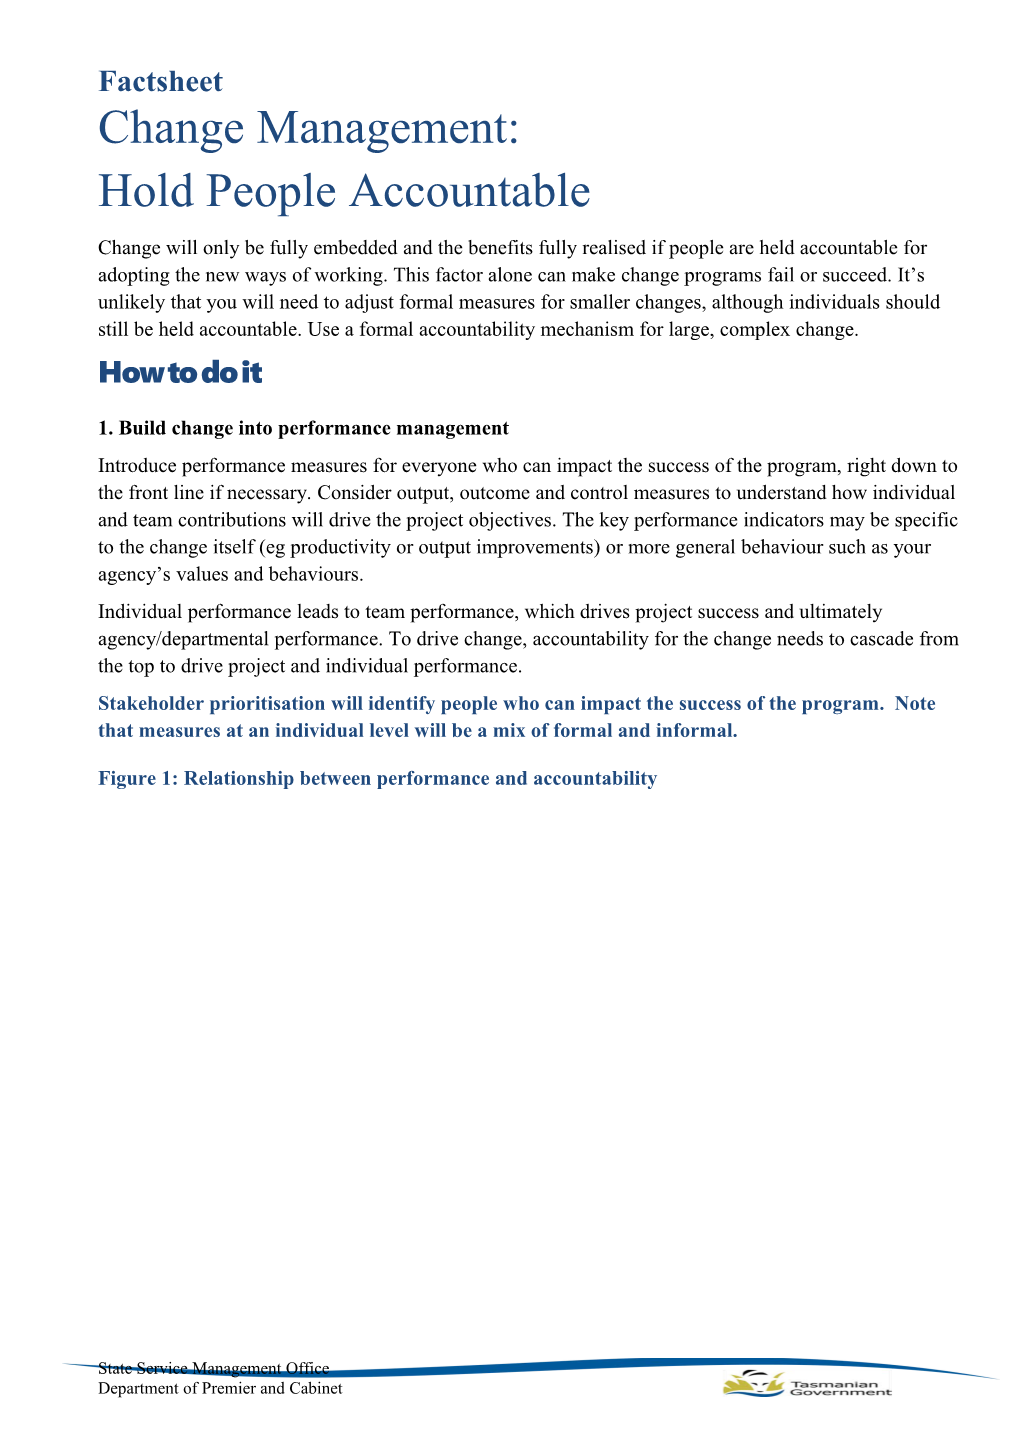 Factsheet: Change Management: Hold People Accountable